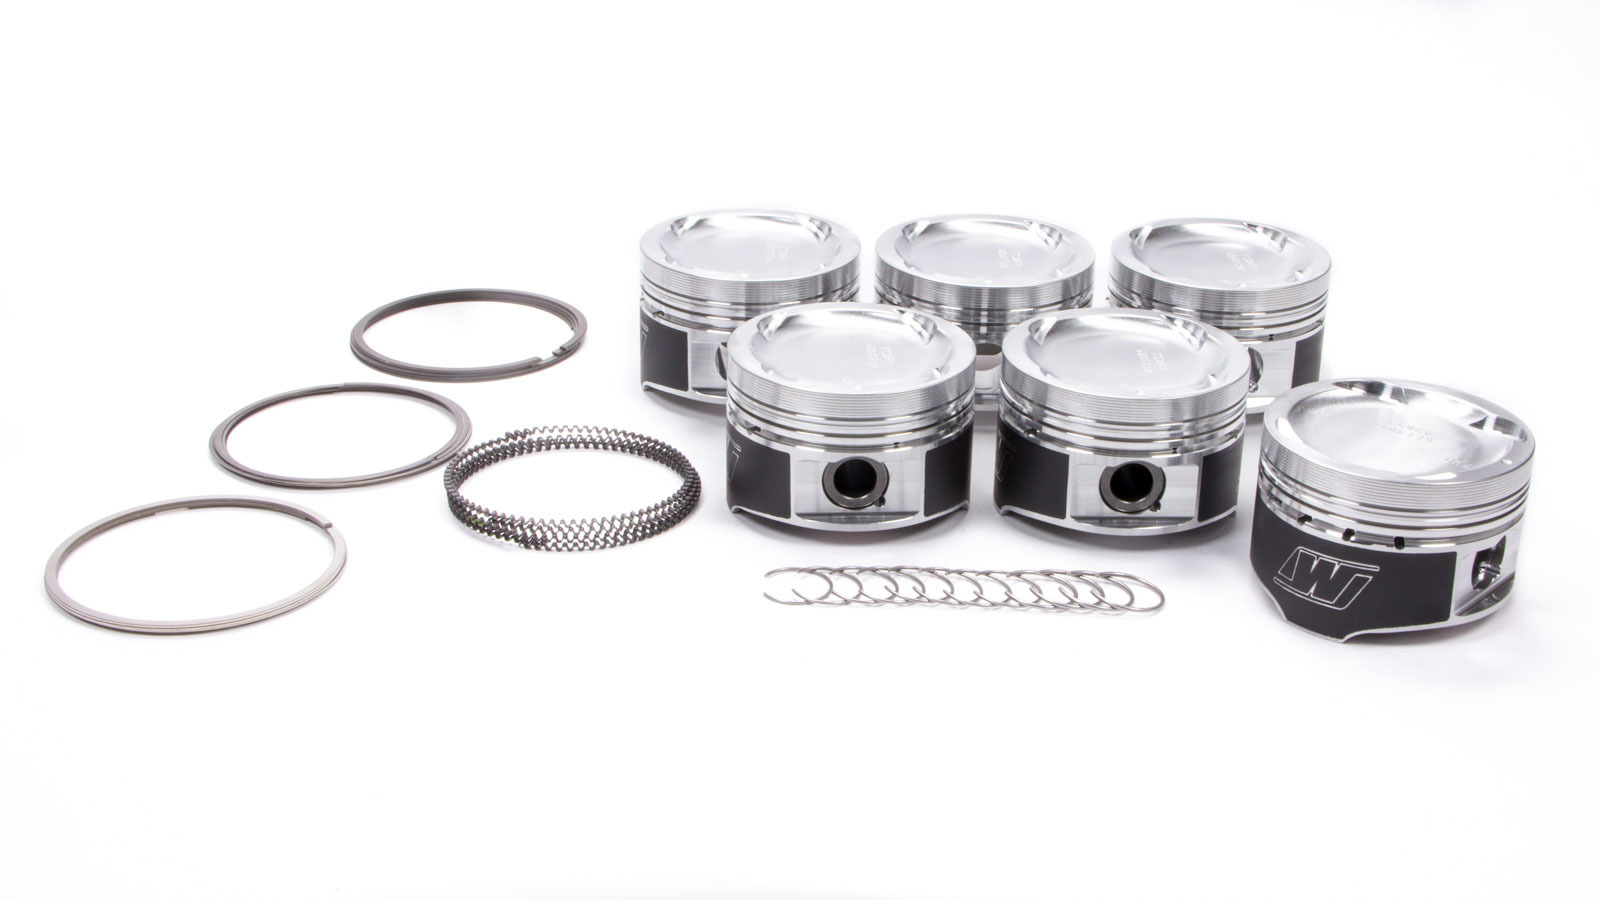 Wiseco Pistons K613M84 Piston and Ring, Sports Compact, Forged, 84.00 mm Bore, 1.0 x 1.2 x 2.8 mm Ring Groove, Minus 16.00 cc, Toyota In-Line-6, Kit